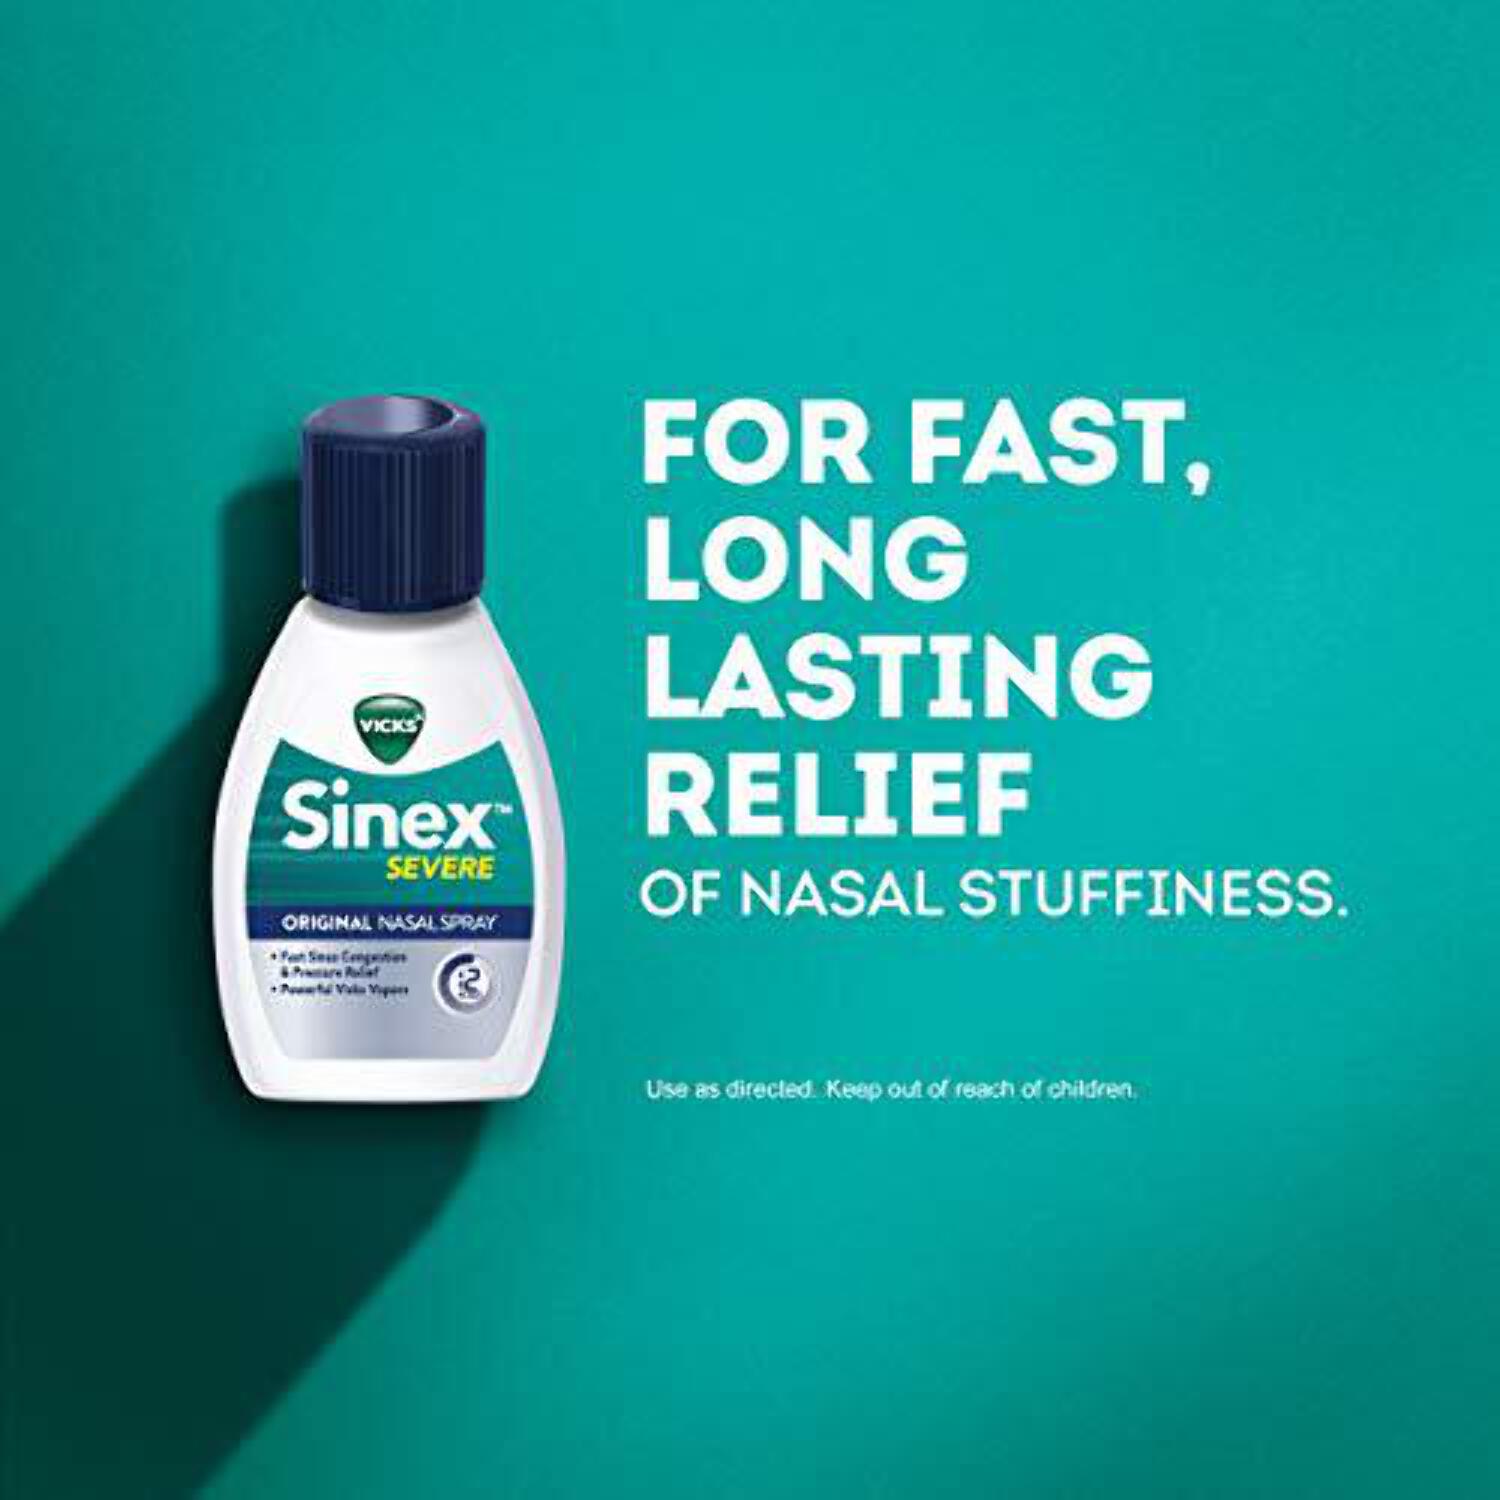 Vicks Sinex Severe Original Nasal Spray, Decongestant Medicine, Relief from Stuffy Nose due to Cold or Allergy, & Nasal Congestion, Sinus Pressure Relief, 0.5 fl oz - image 5 of 8